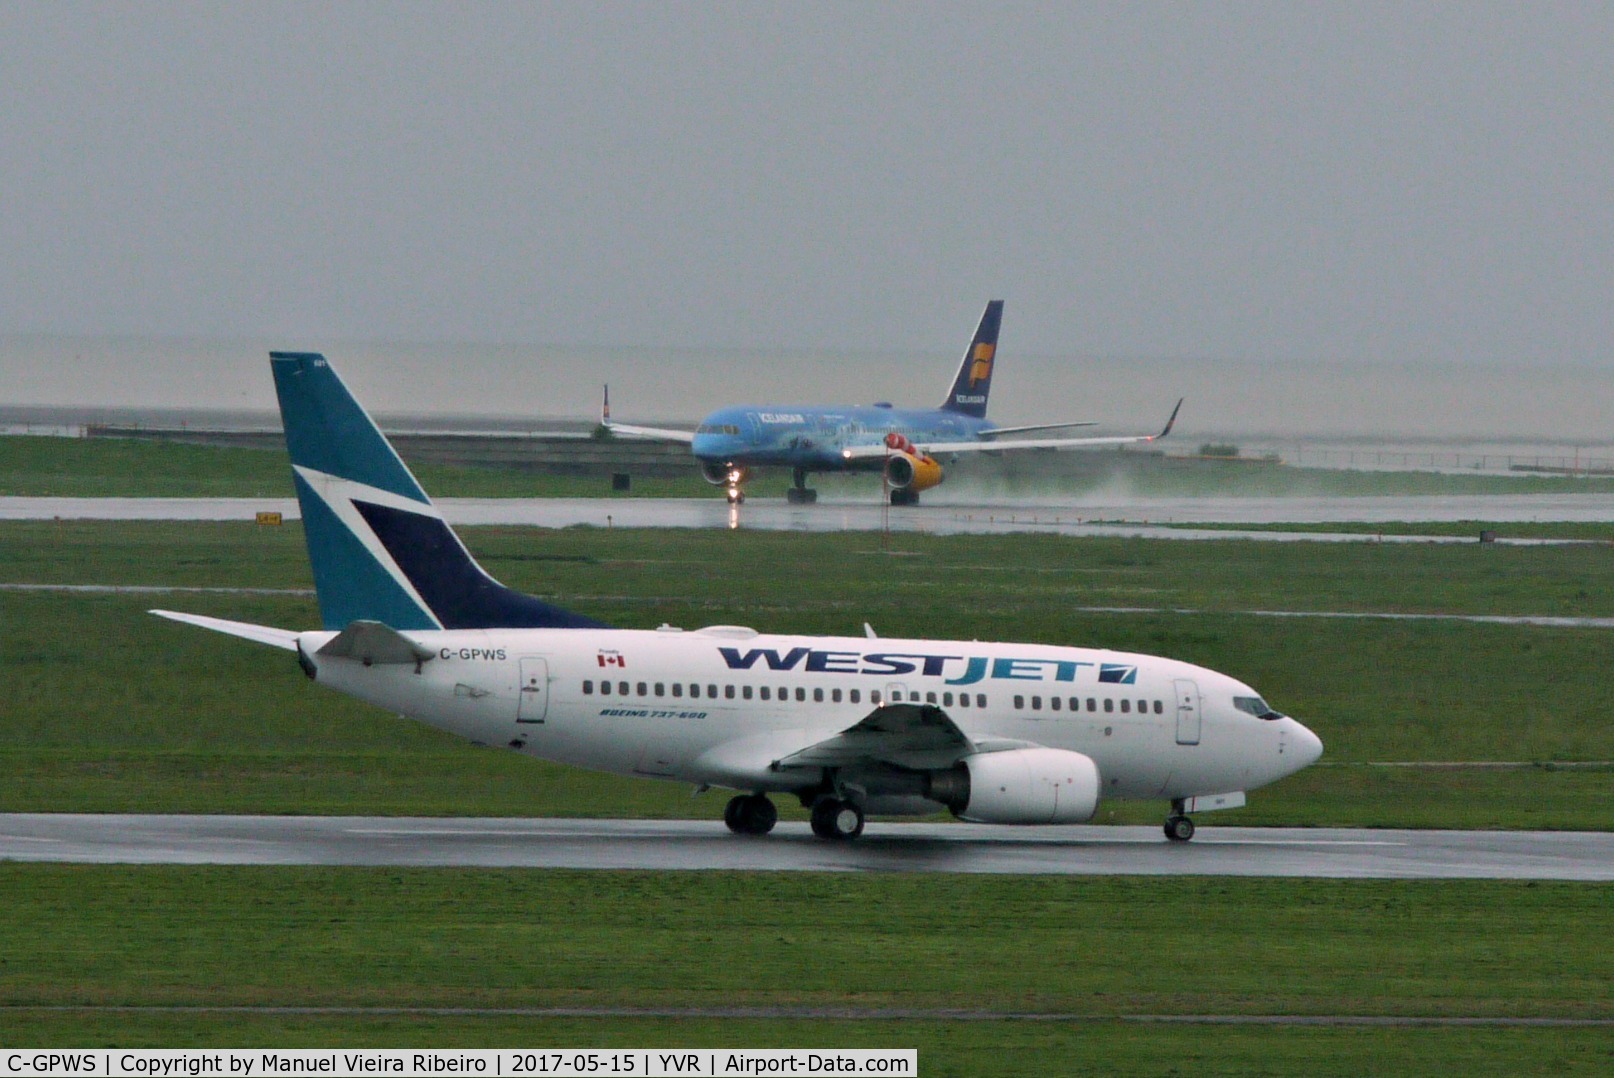 C-GPWS, 2005 Boeing 737-6CT C/N 34284, Departure to YYZ. TF-FIR FI696 to KEF in background